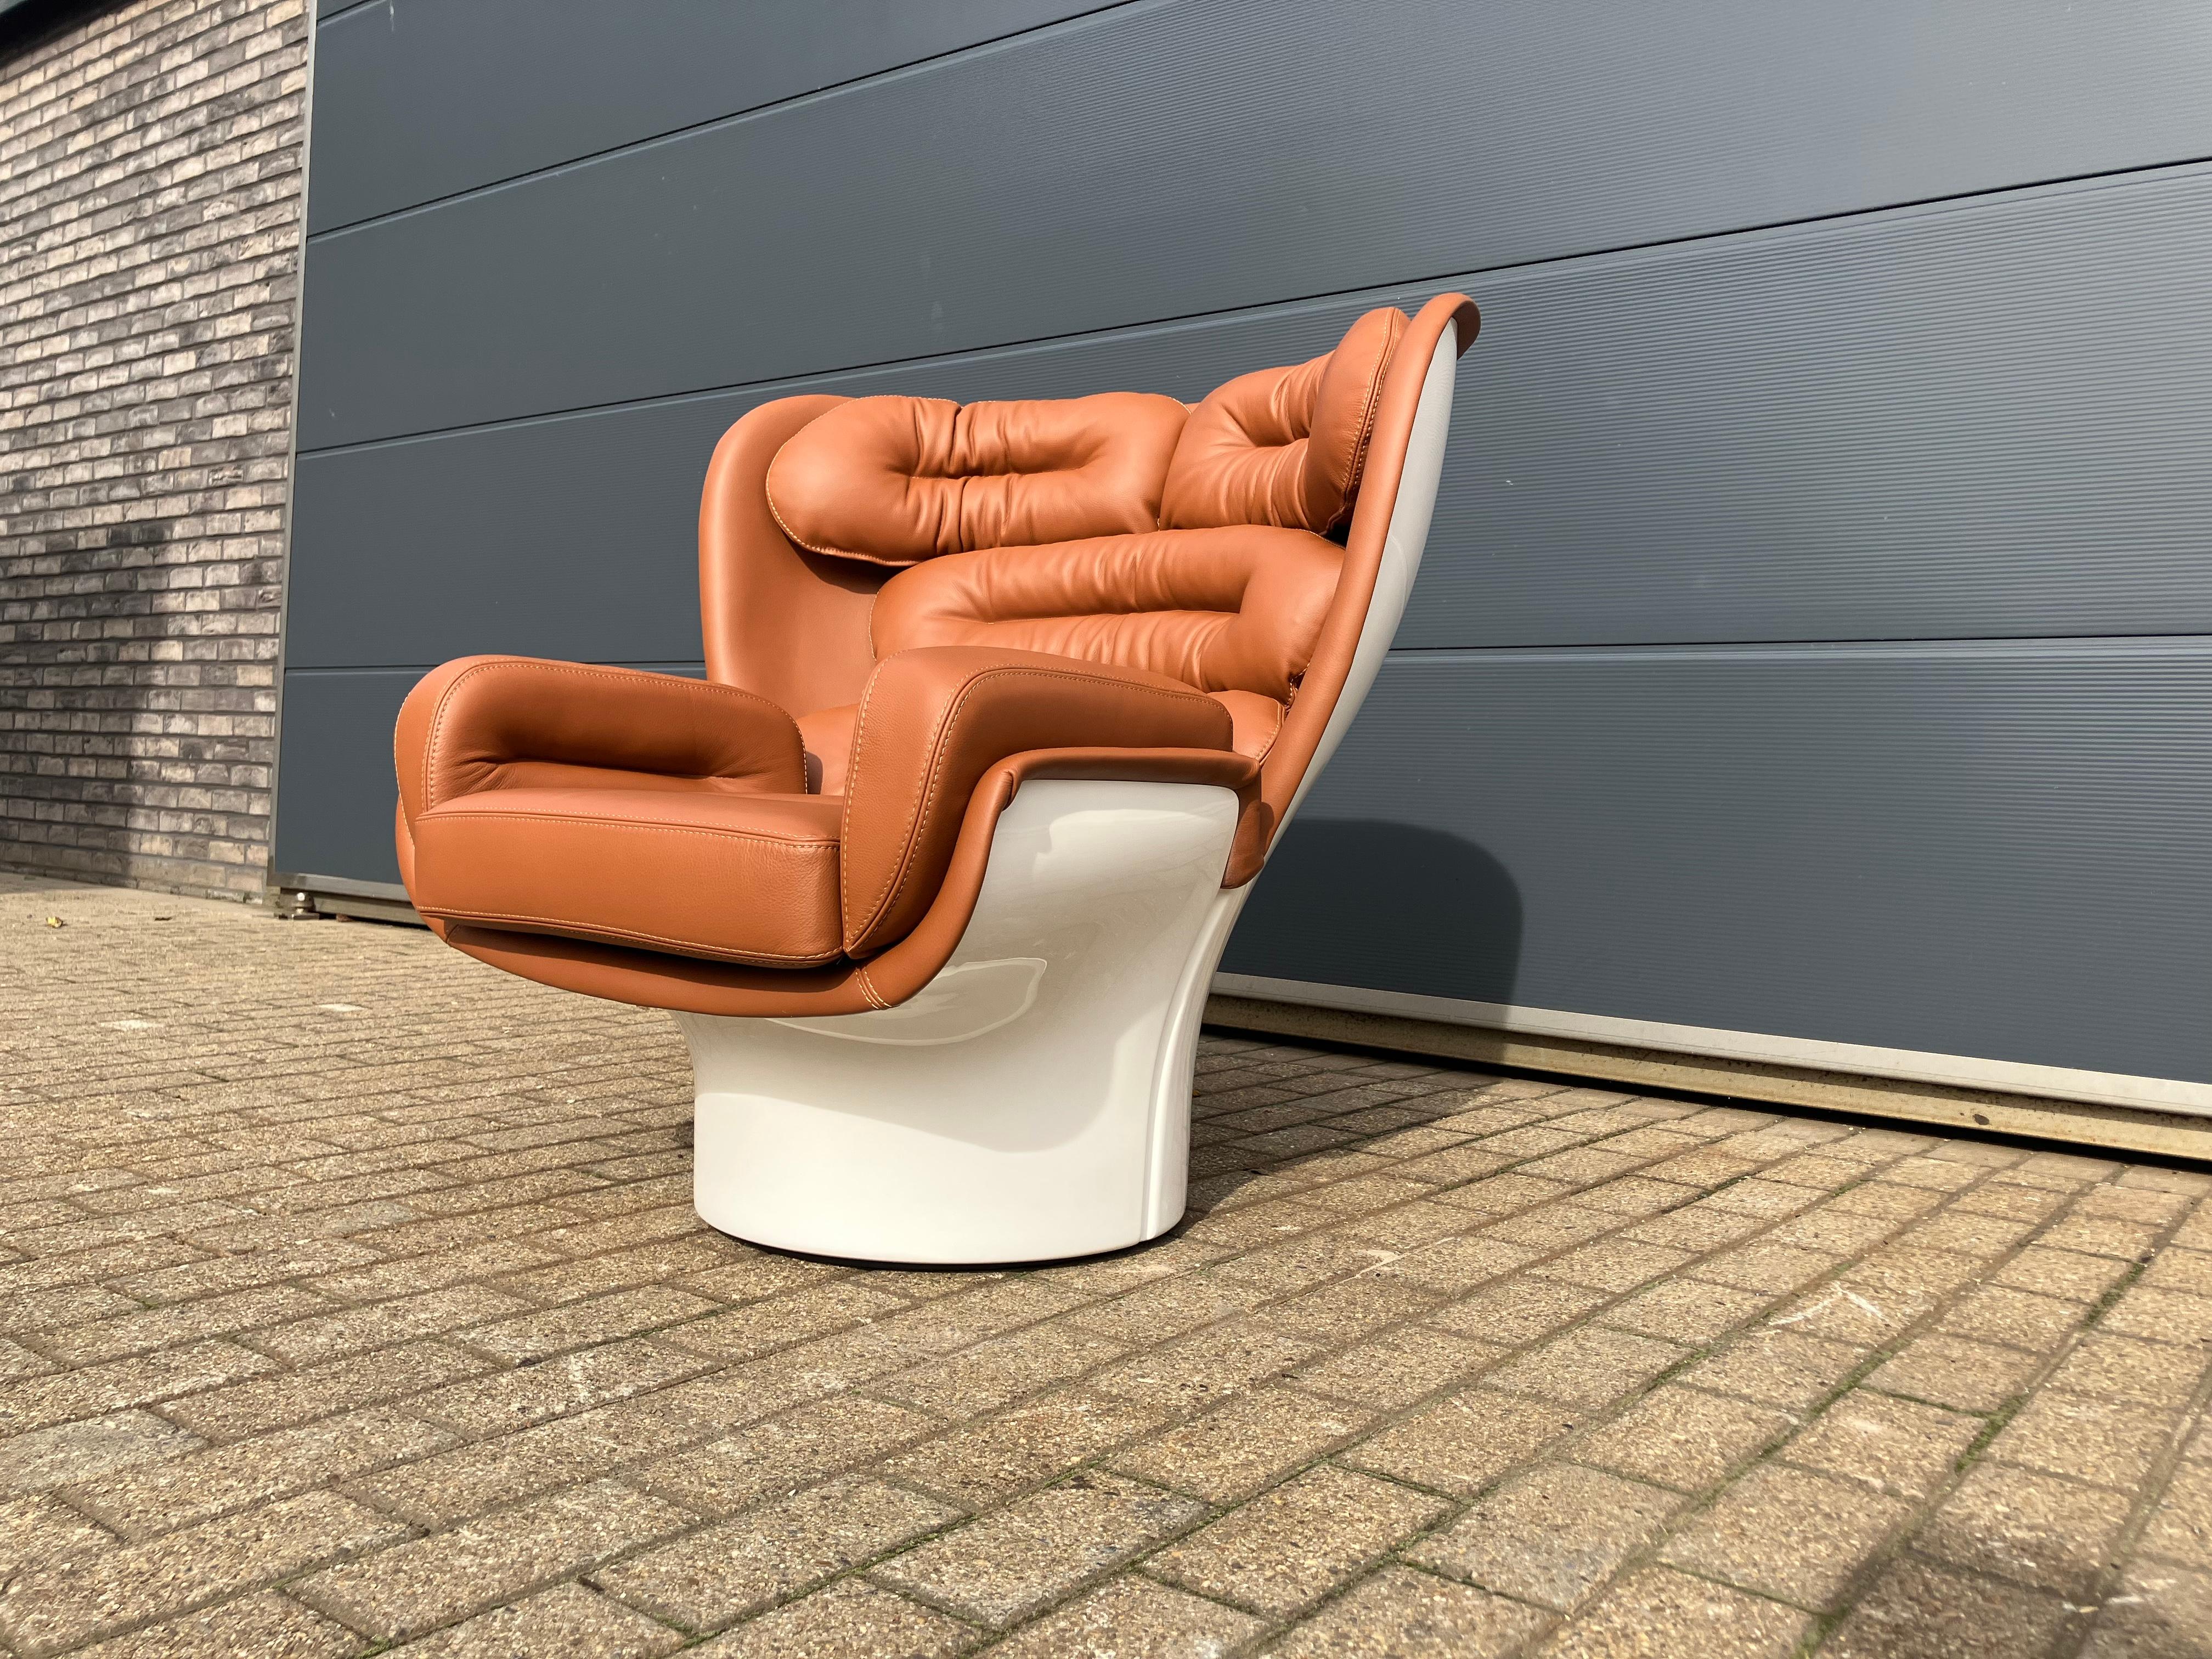 Space Age Joe Colombo Elda chair Cognac leather, White shell For Sale